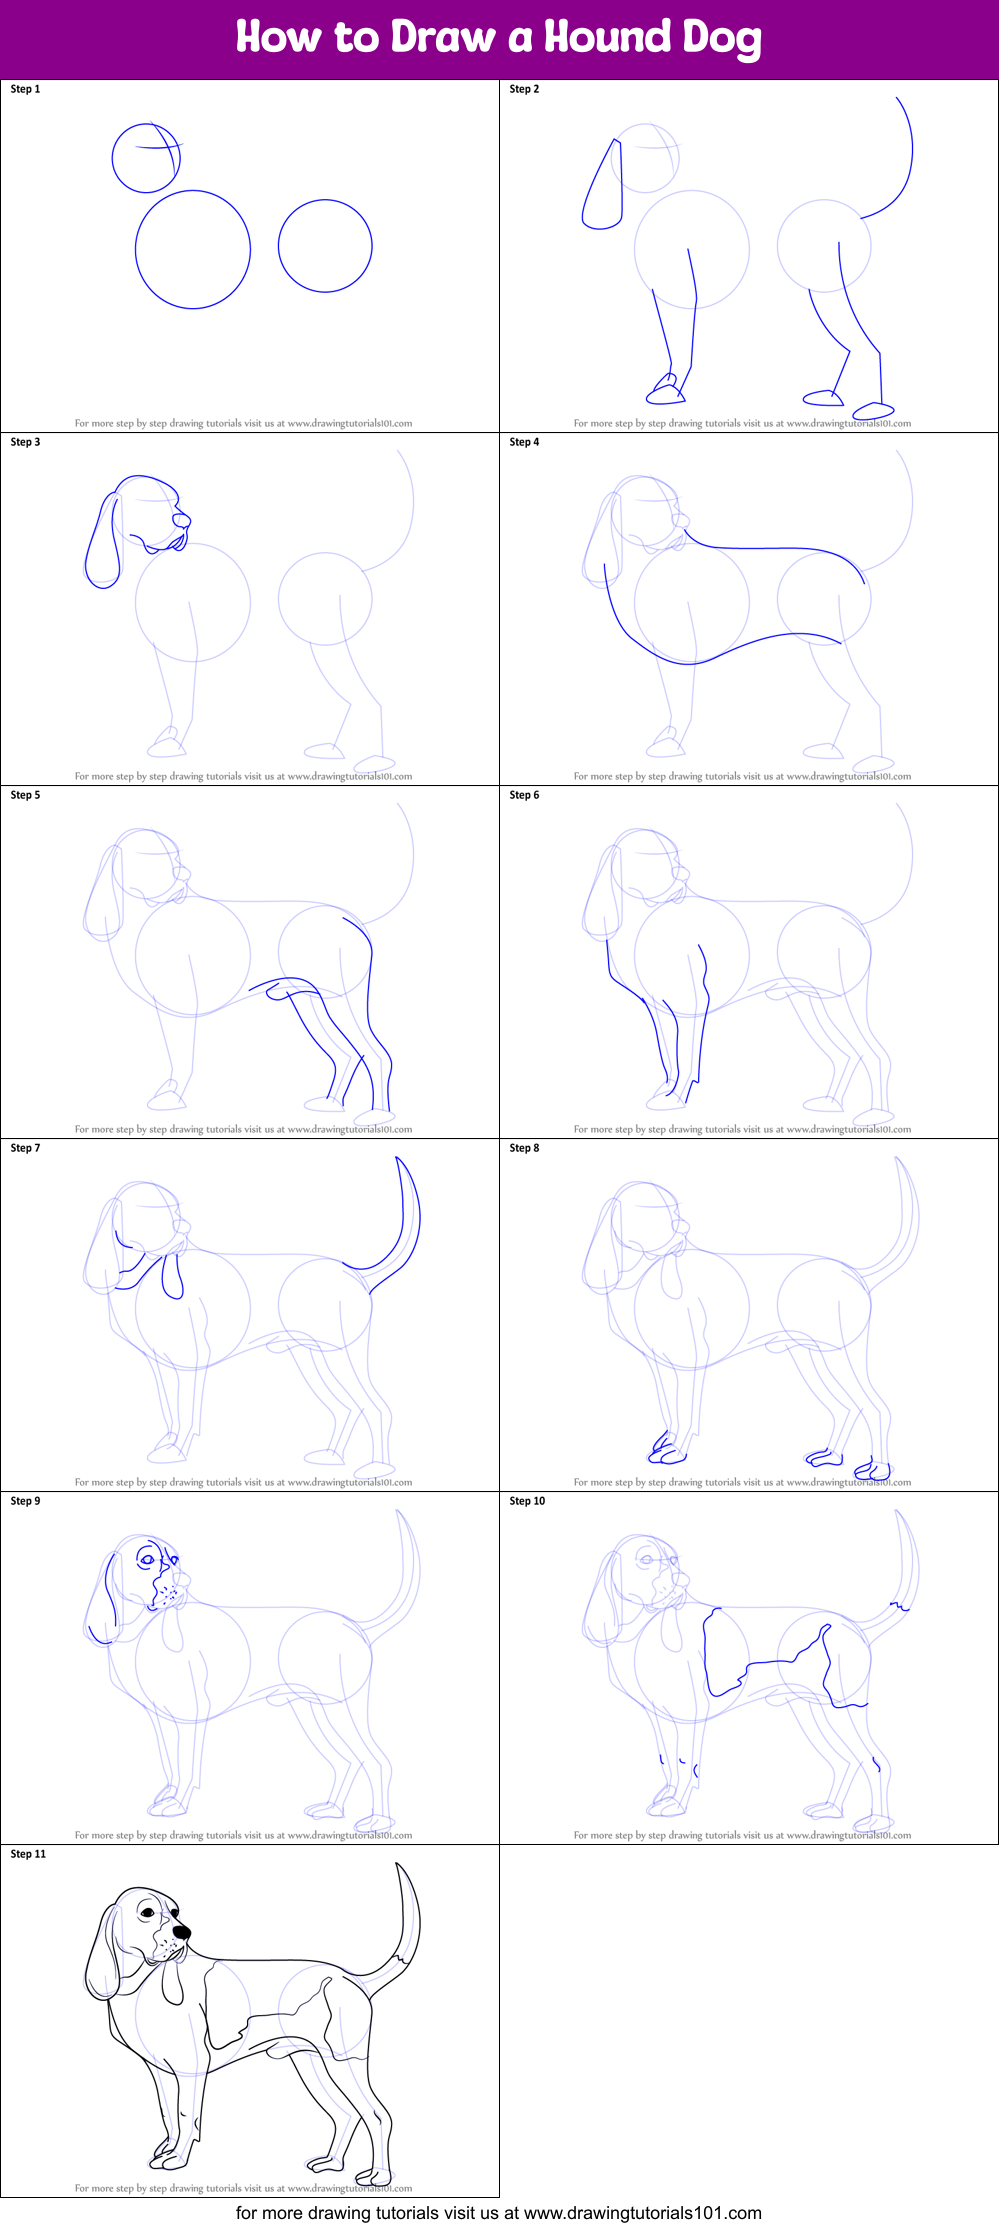 How to Draw a Hound Dog printable step by step drawing sheet